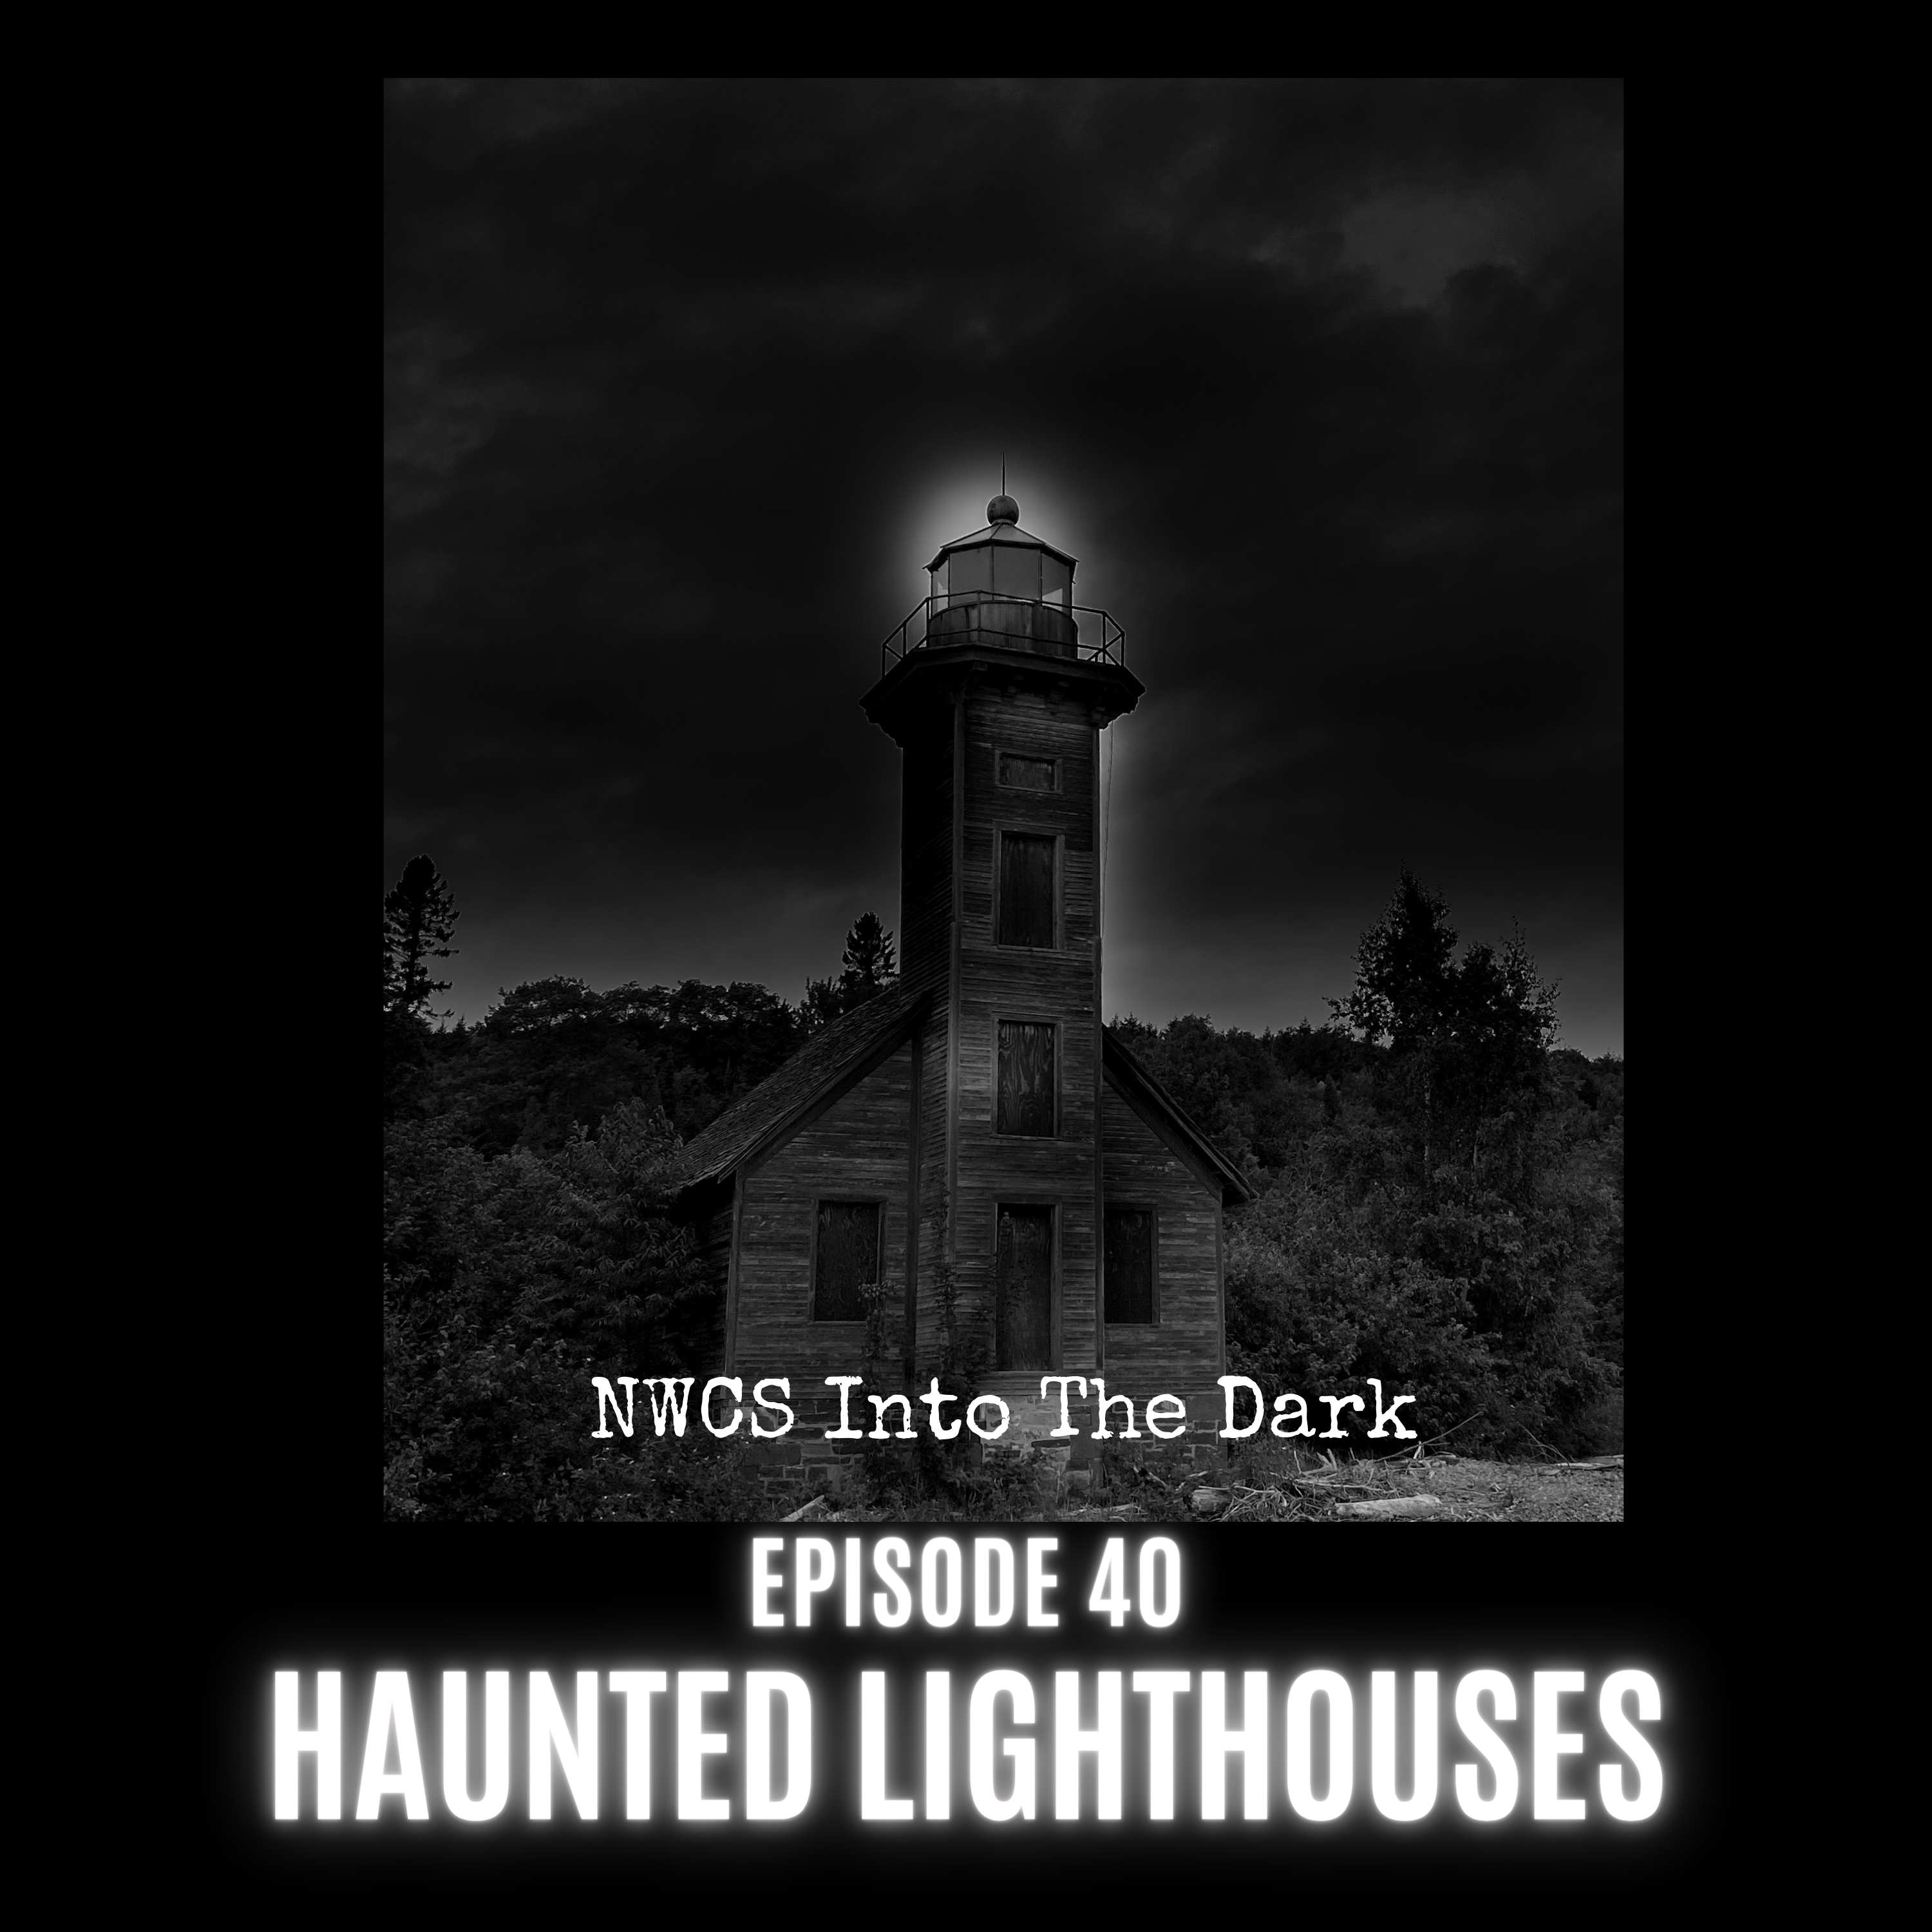 NWCS - Into The Dark Episode 40 Haunted Lighthouses